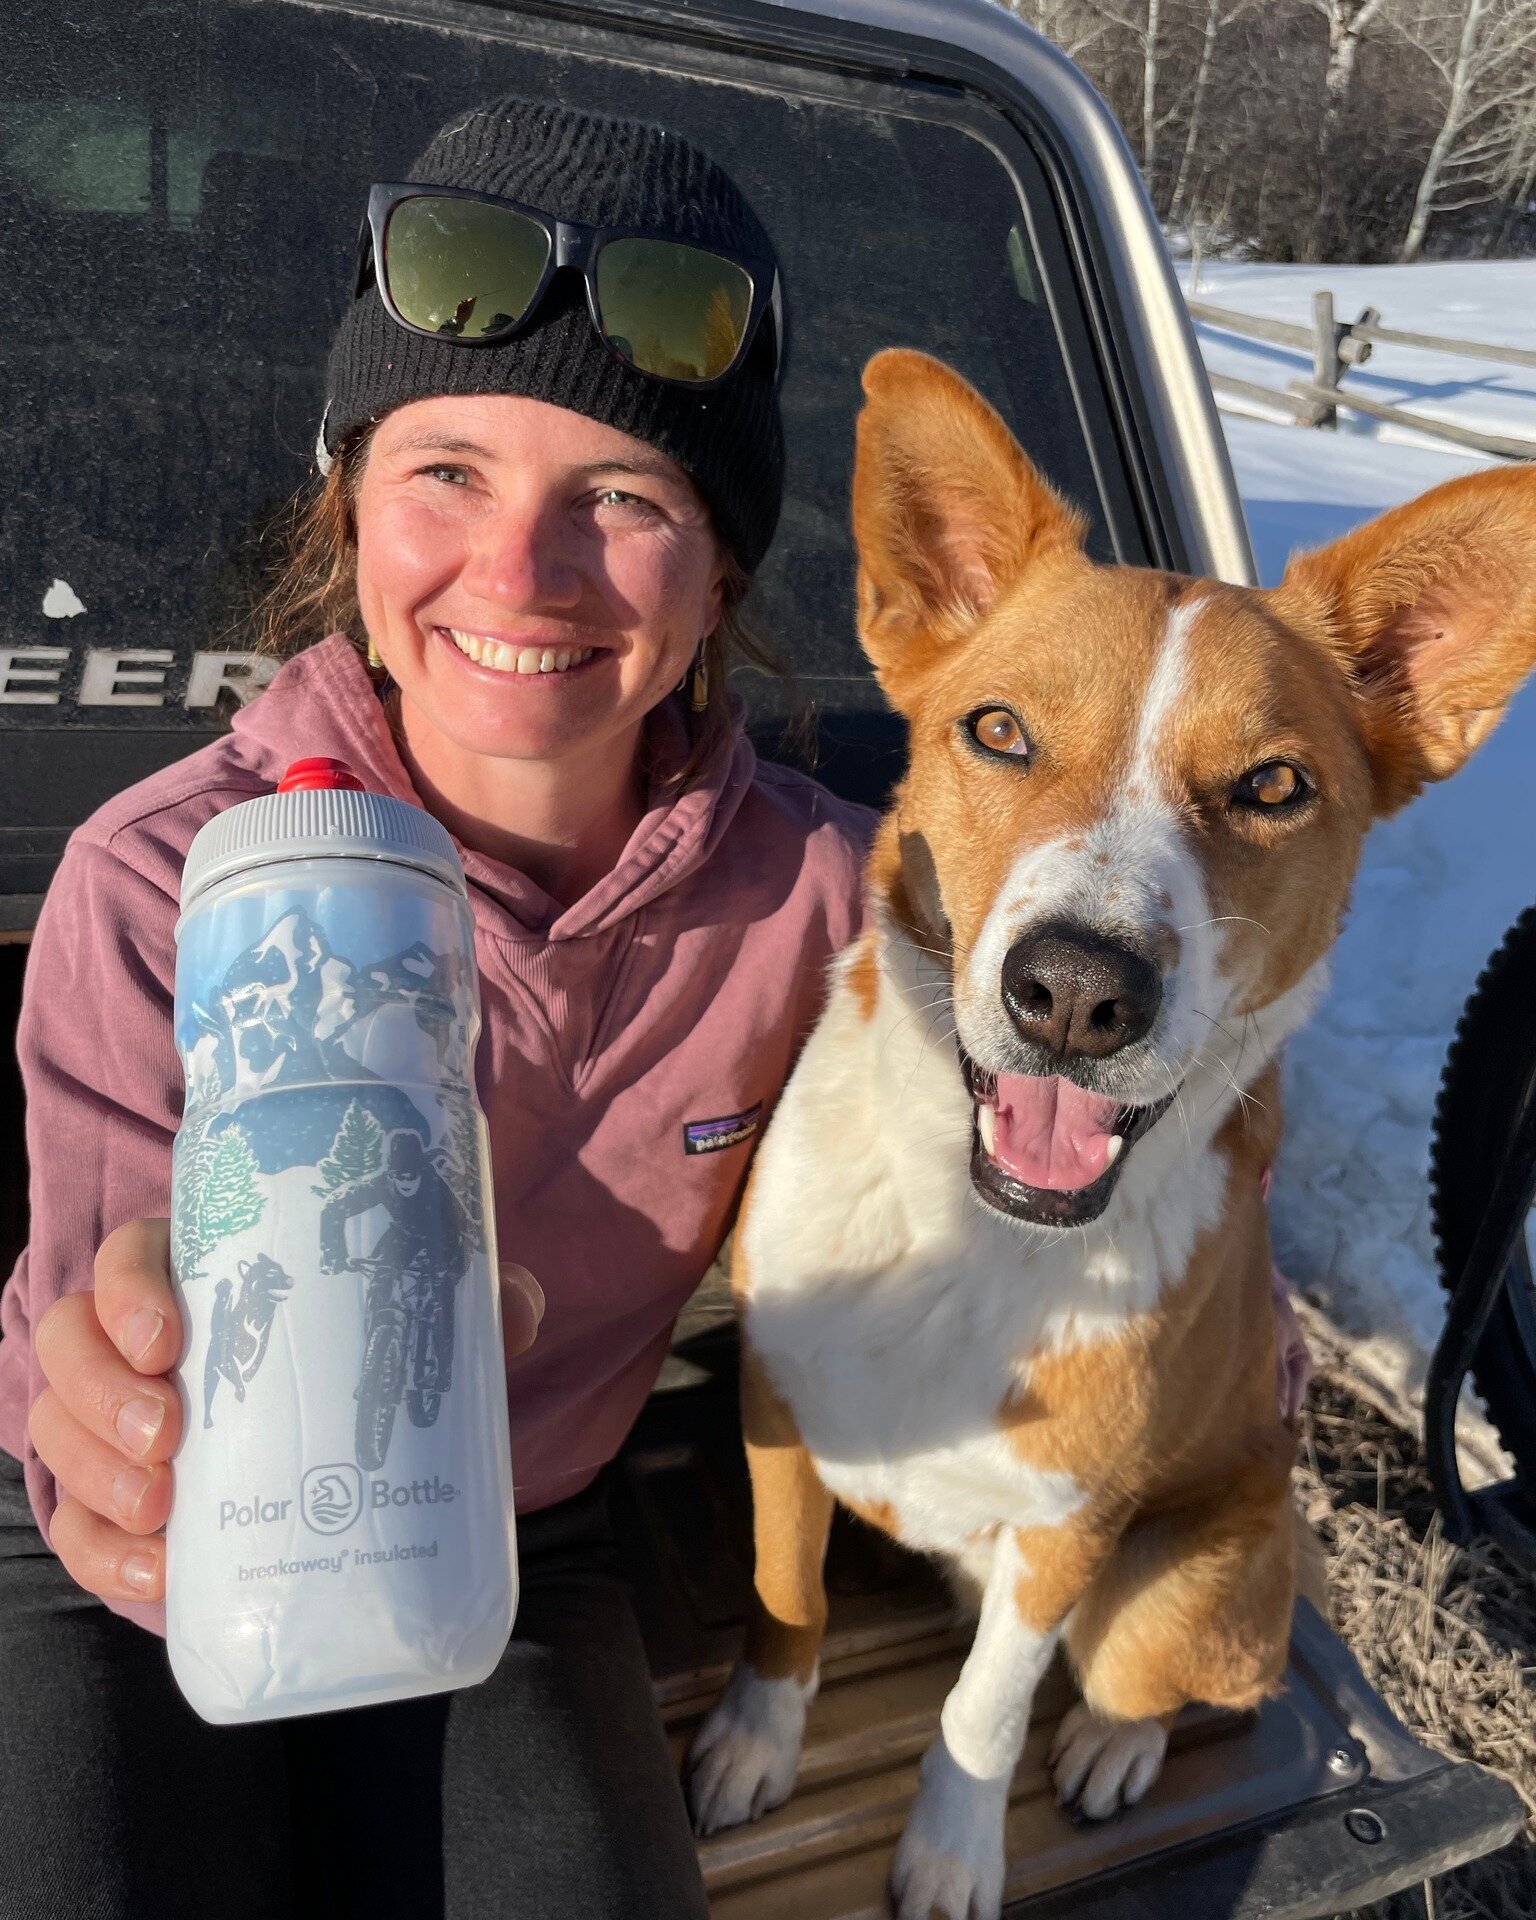 A limited edition Teton MTB water bottle, feat riding with Hank?? Yes! Because as much as I love traveling and riding my bike all over the world, what grounds me MOST of anything is a ride on home trails with my best friend. 🐾🧡

Having home trails 